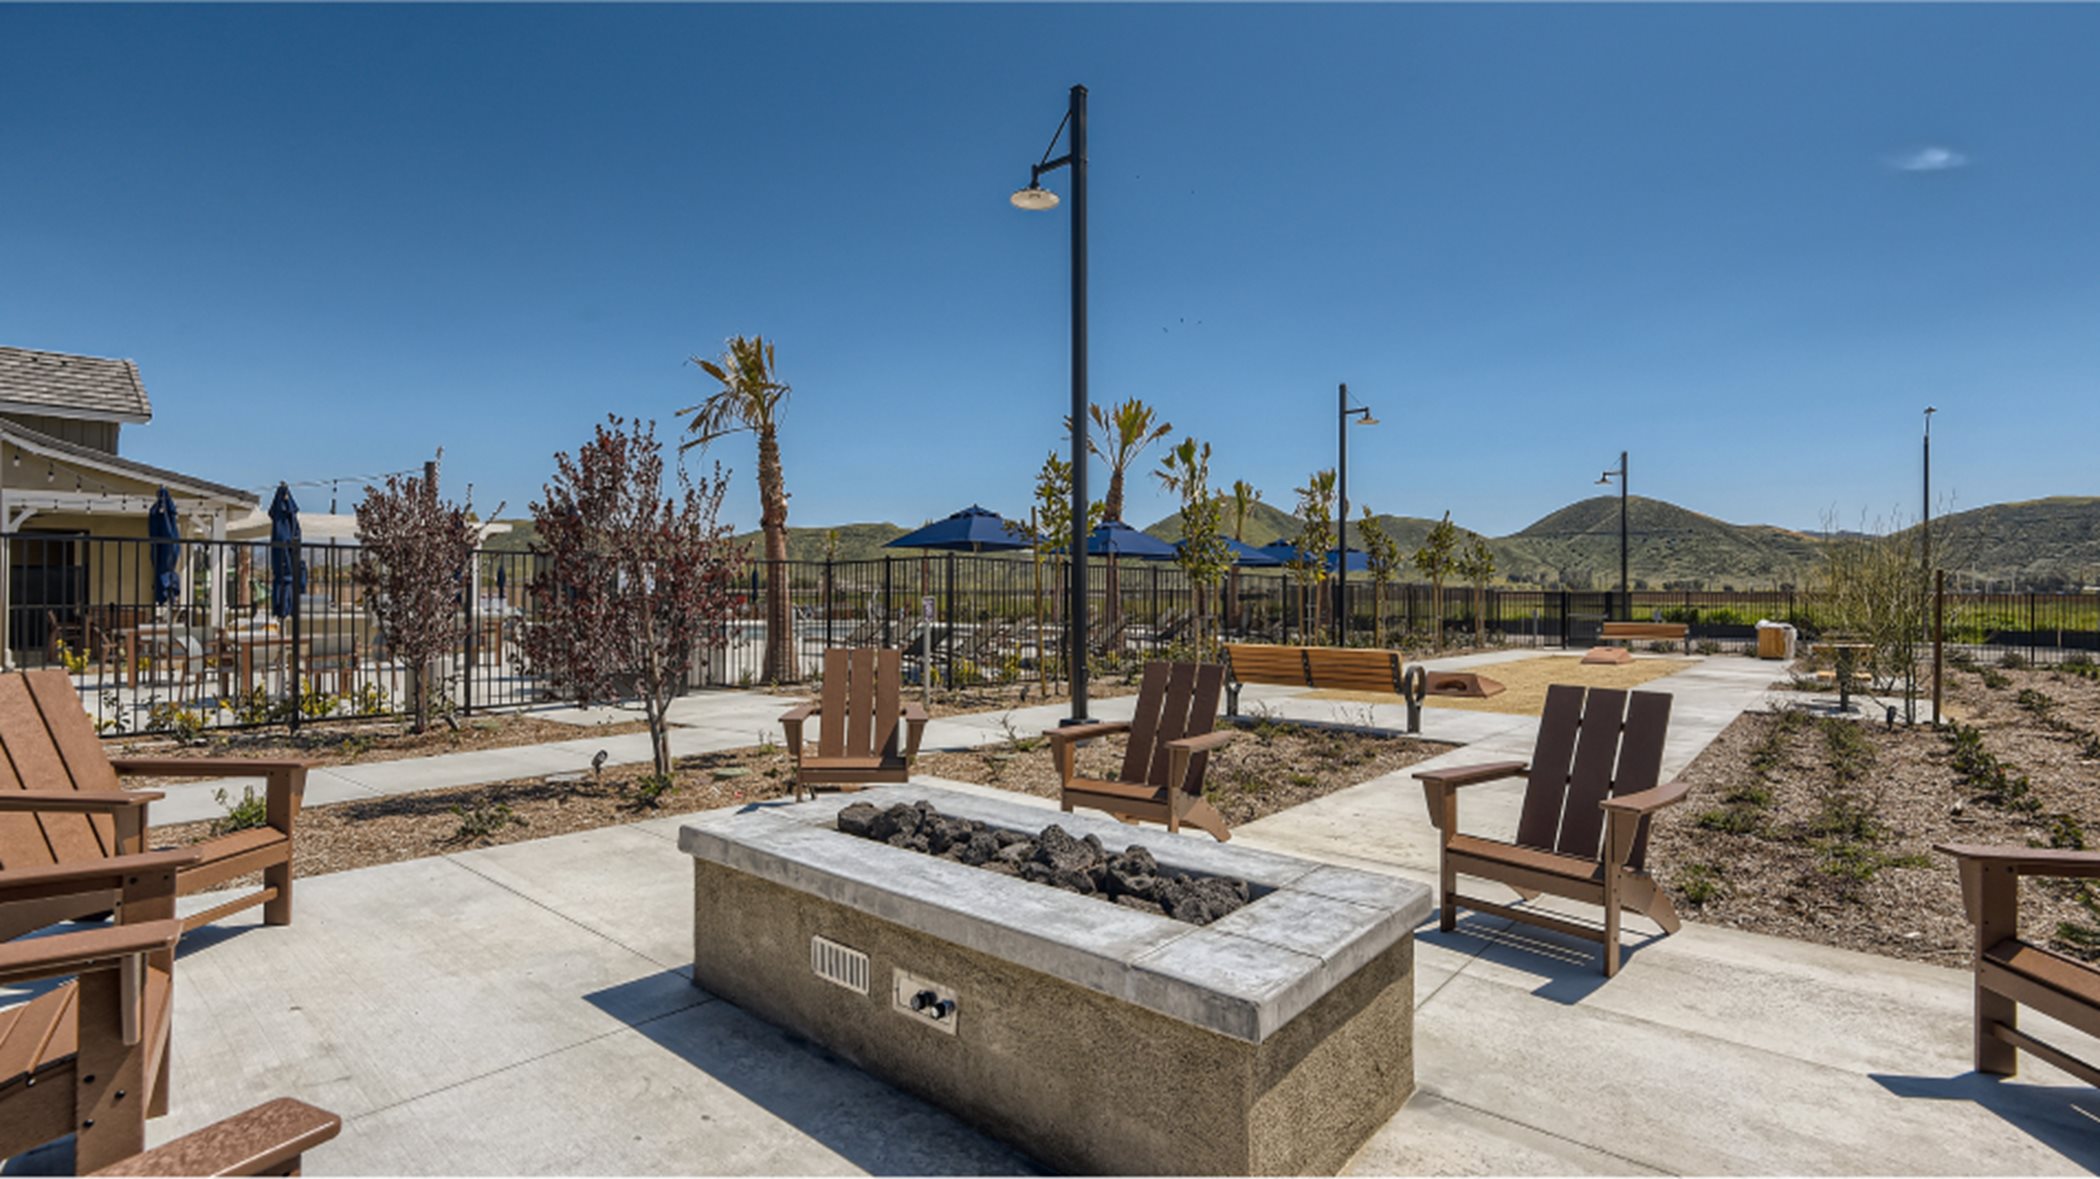 Saddle Point Firepit at the Clubhouse